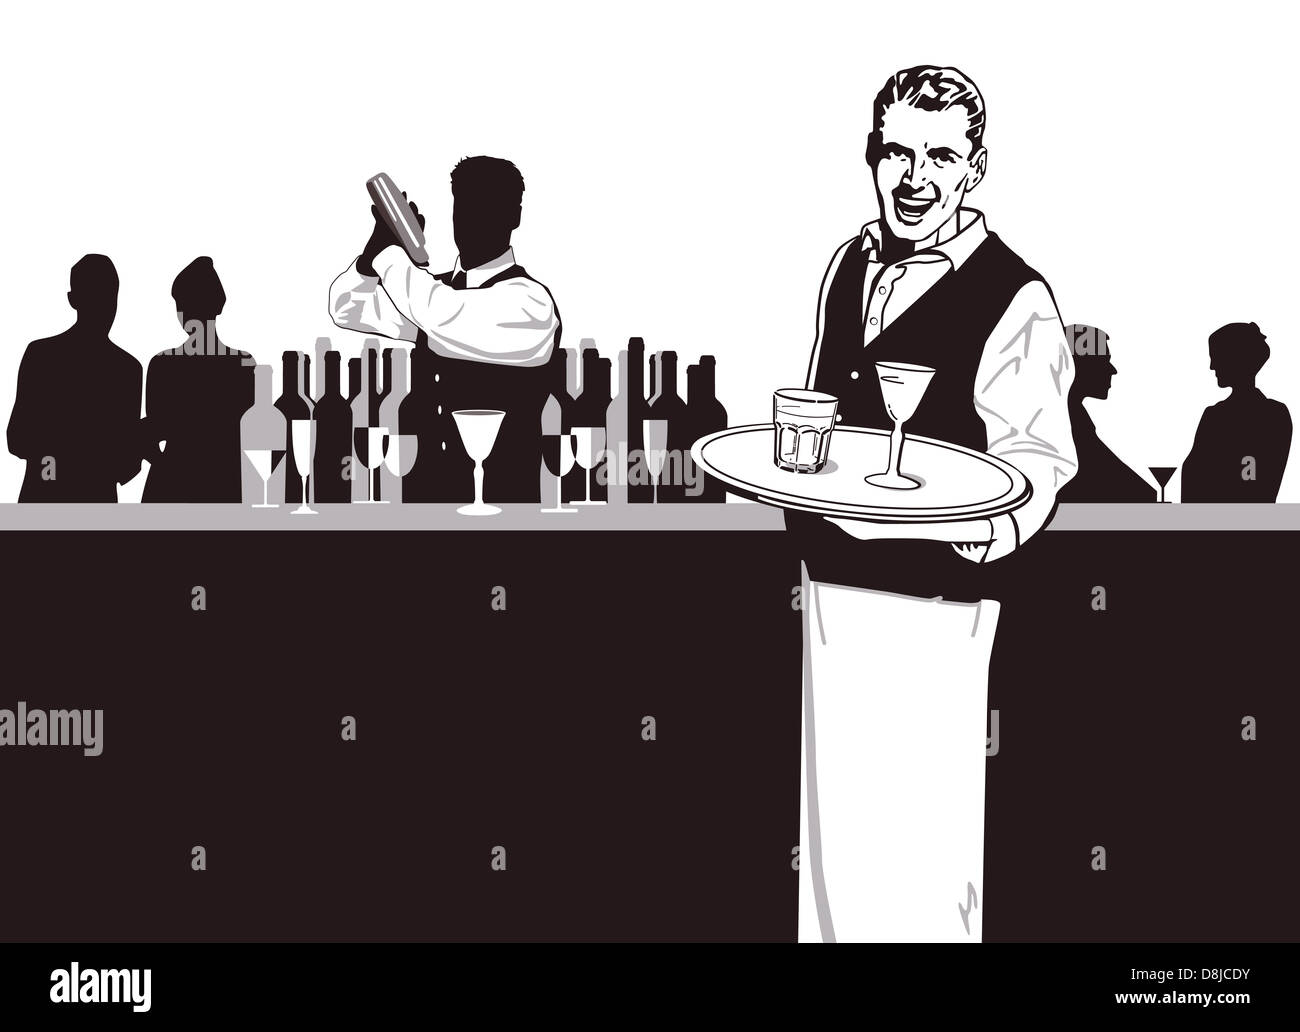 Waiters and Bartender Stock Photo